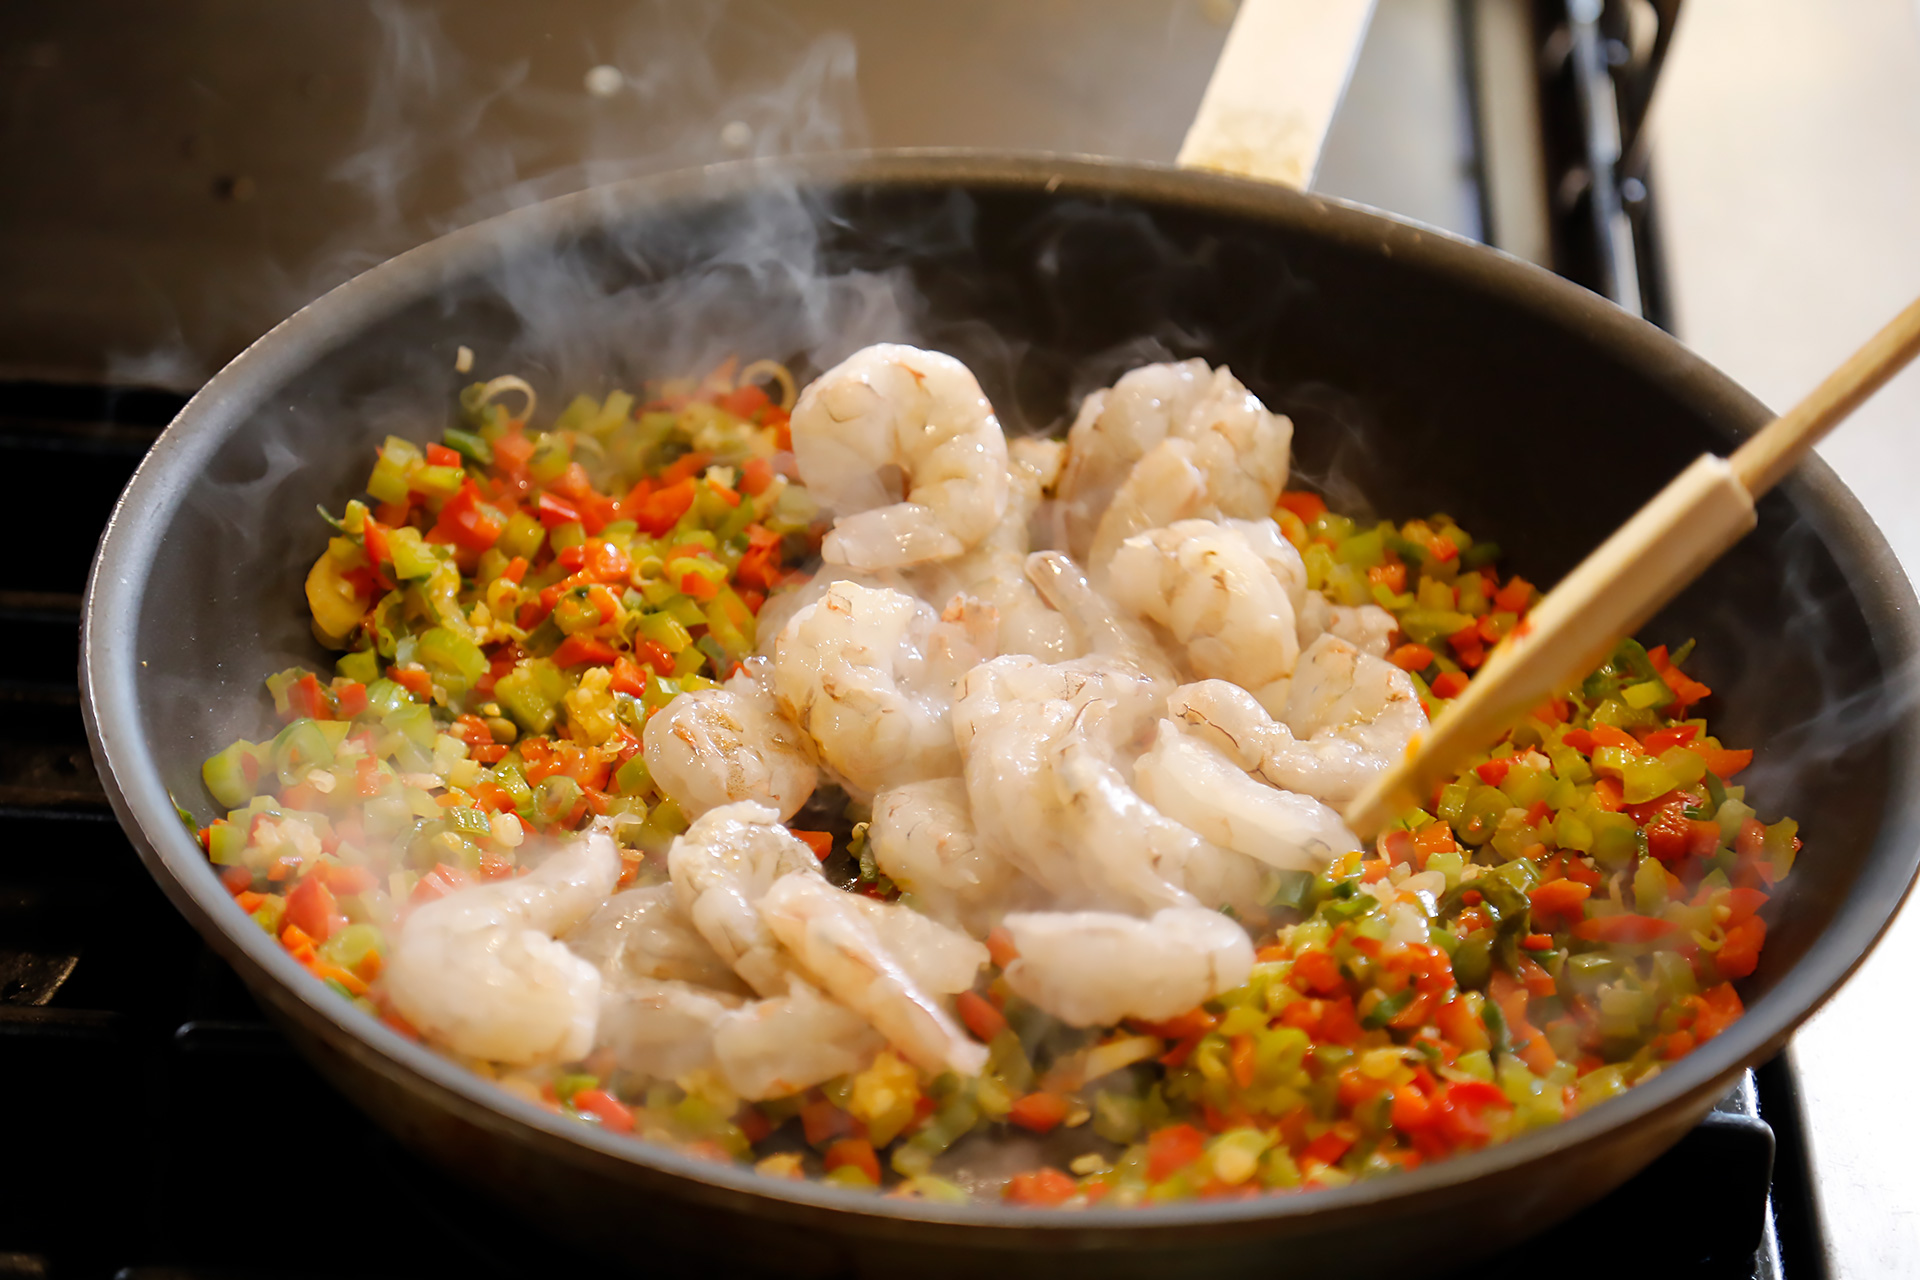 Add shrimp, sprinkle with Creole spice and sear on one side.